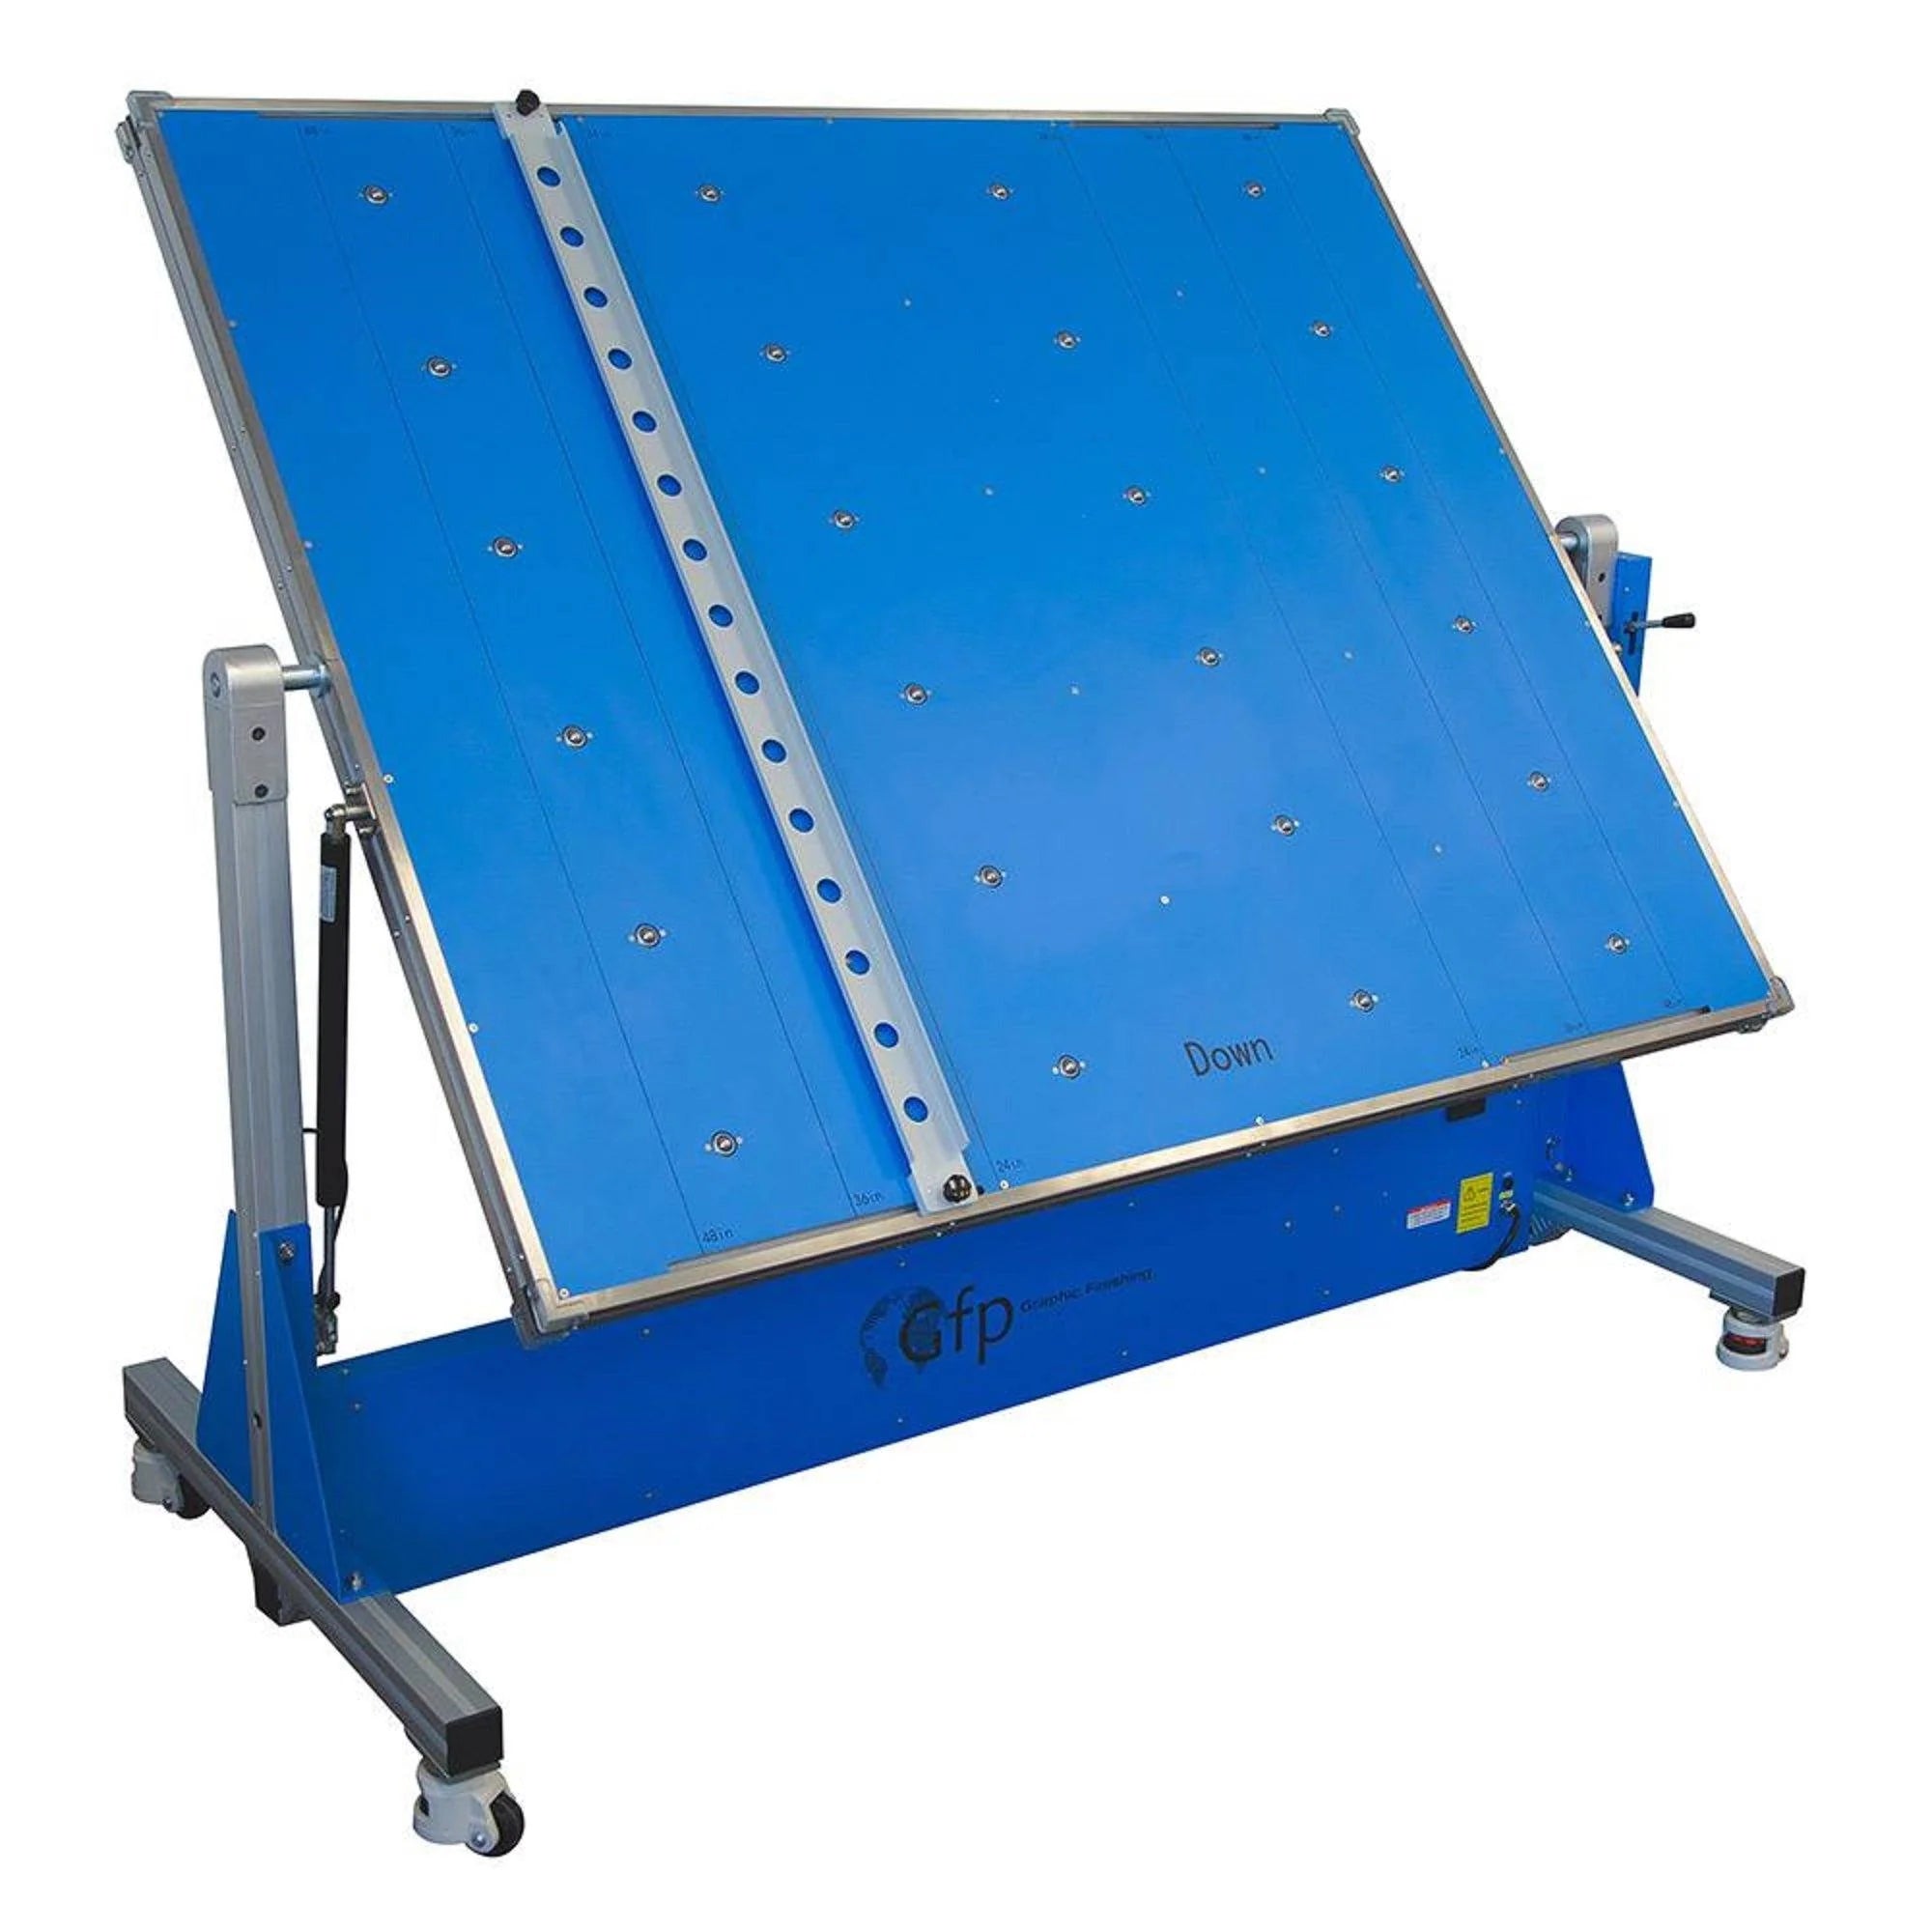 GFP FT48 Transfer Table